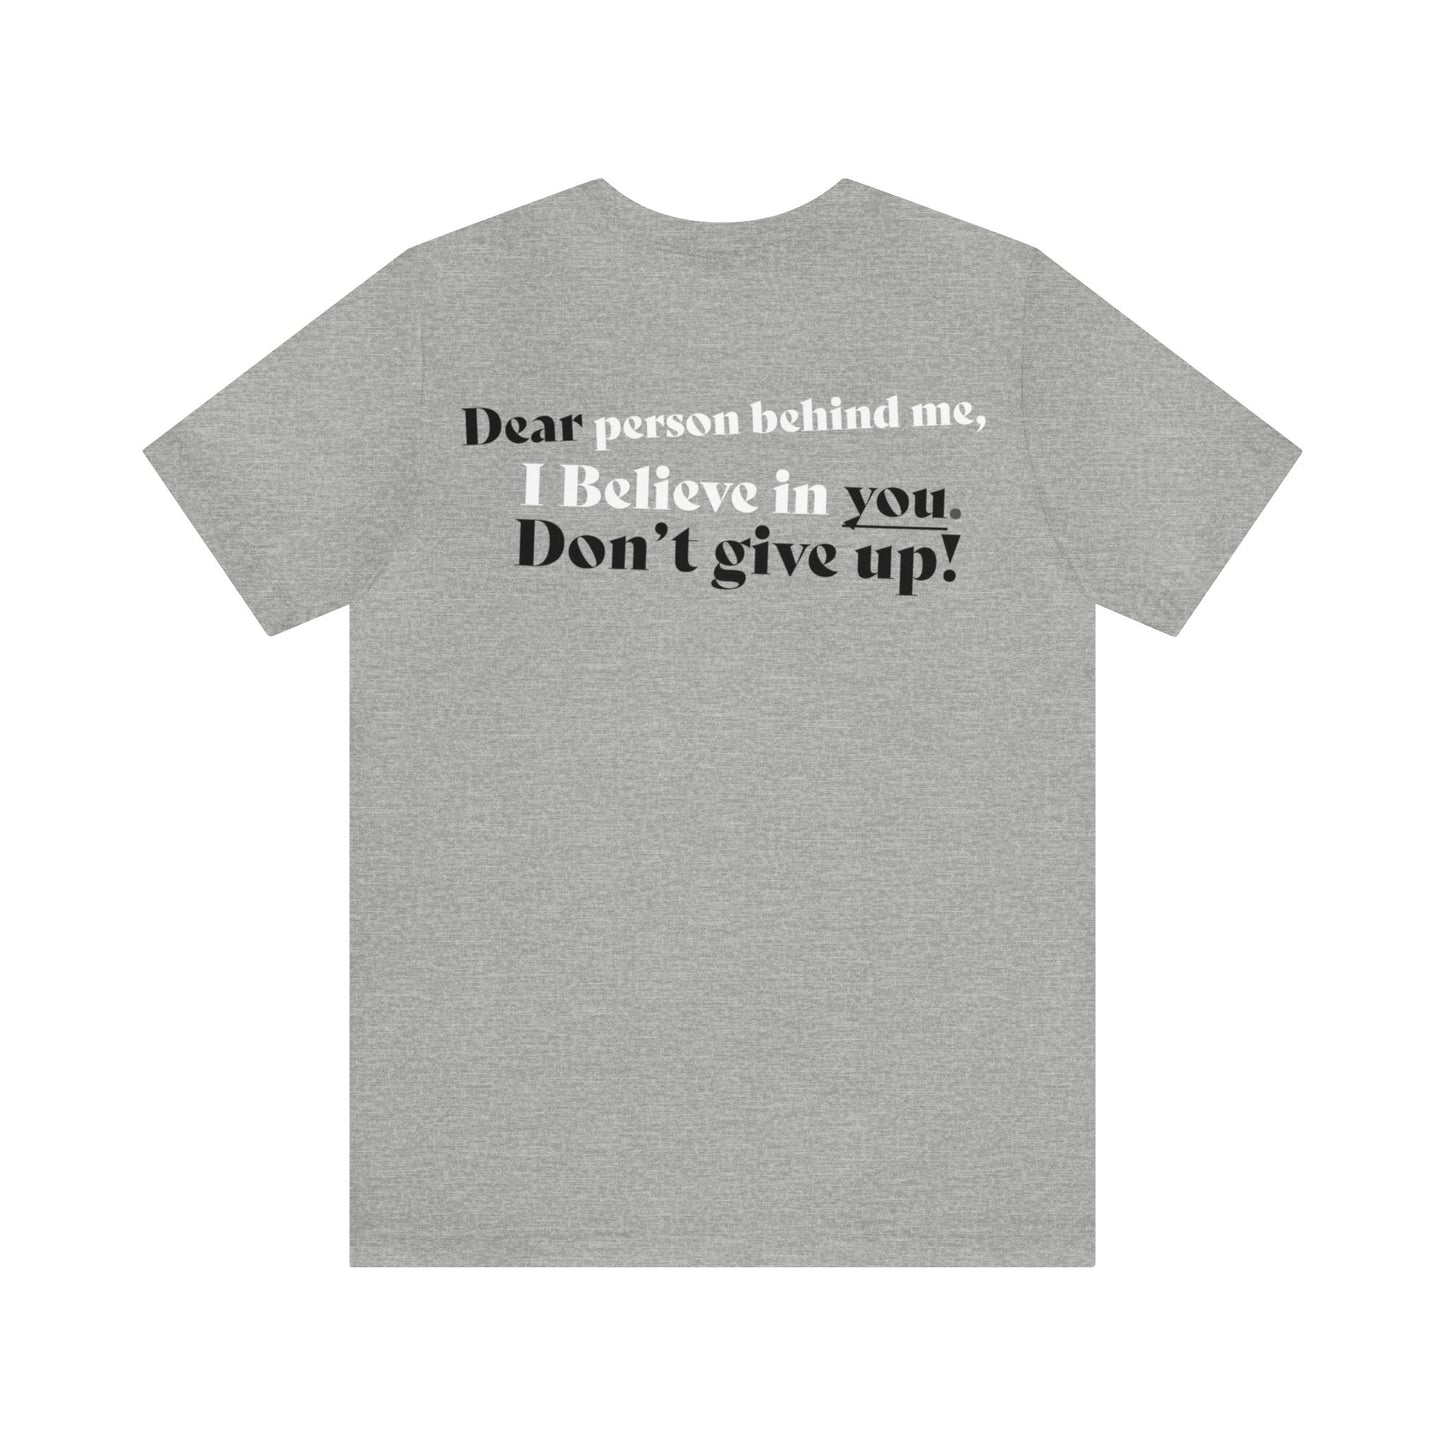 Toriano Tate: Don't Give Up Tee